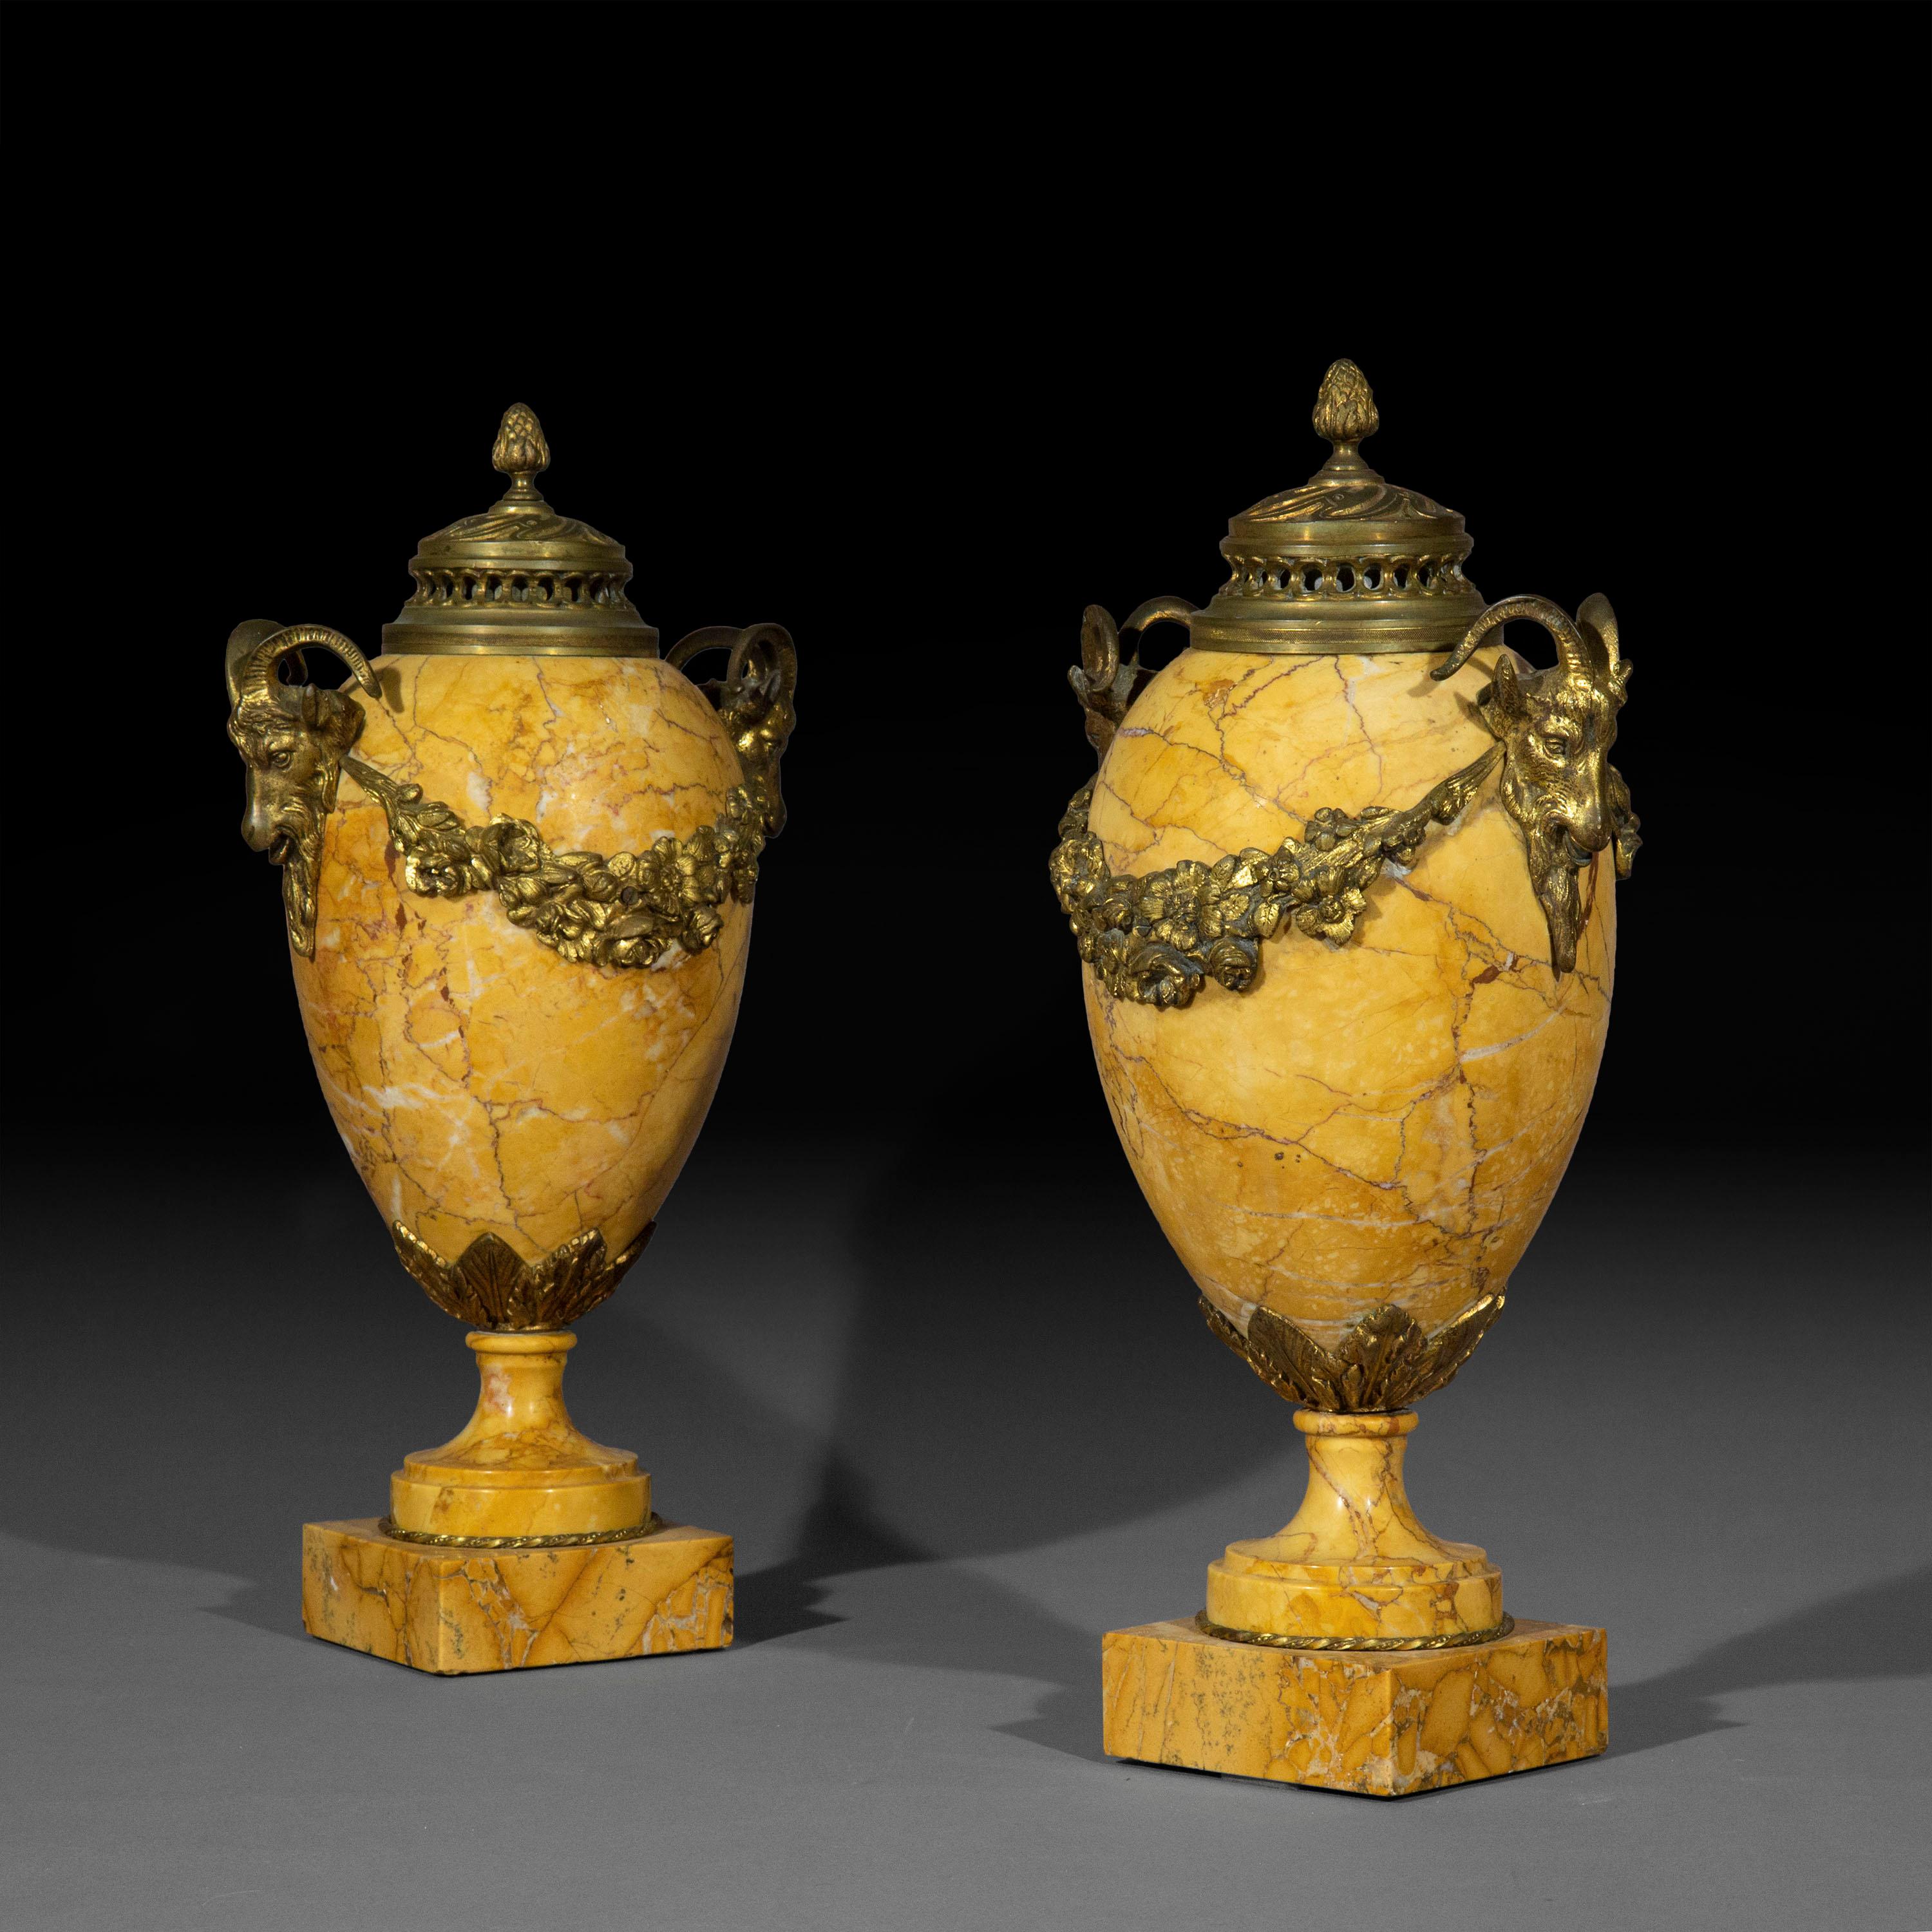 A superbly decorative pair of neoclassical Siena marble urns, with old patinated gilt bronze mounts

French, late 19th - early 20th century.

We love the colour and scale of these splendid urns. Can be converted to table lamps.
 